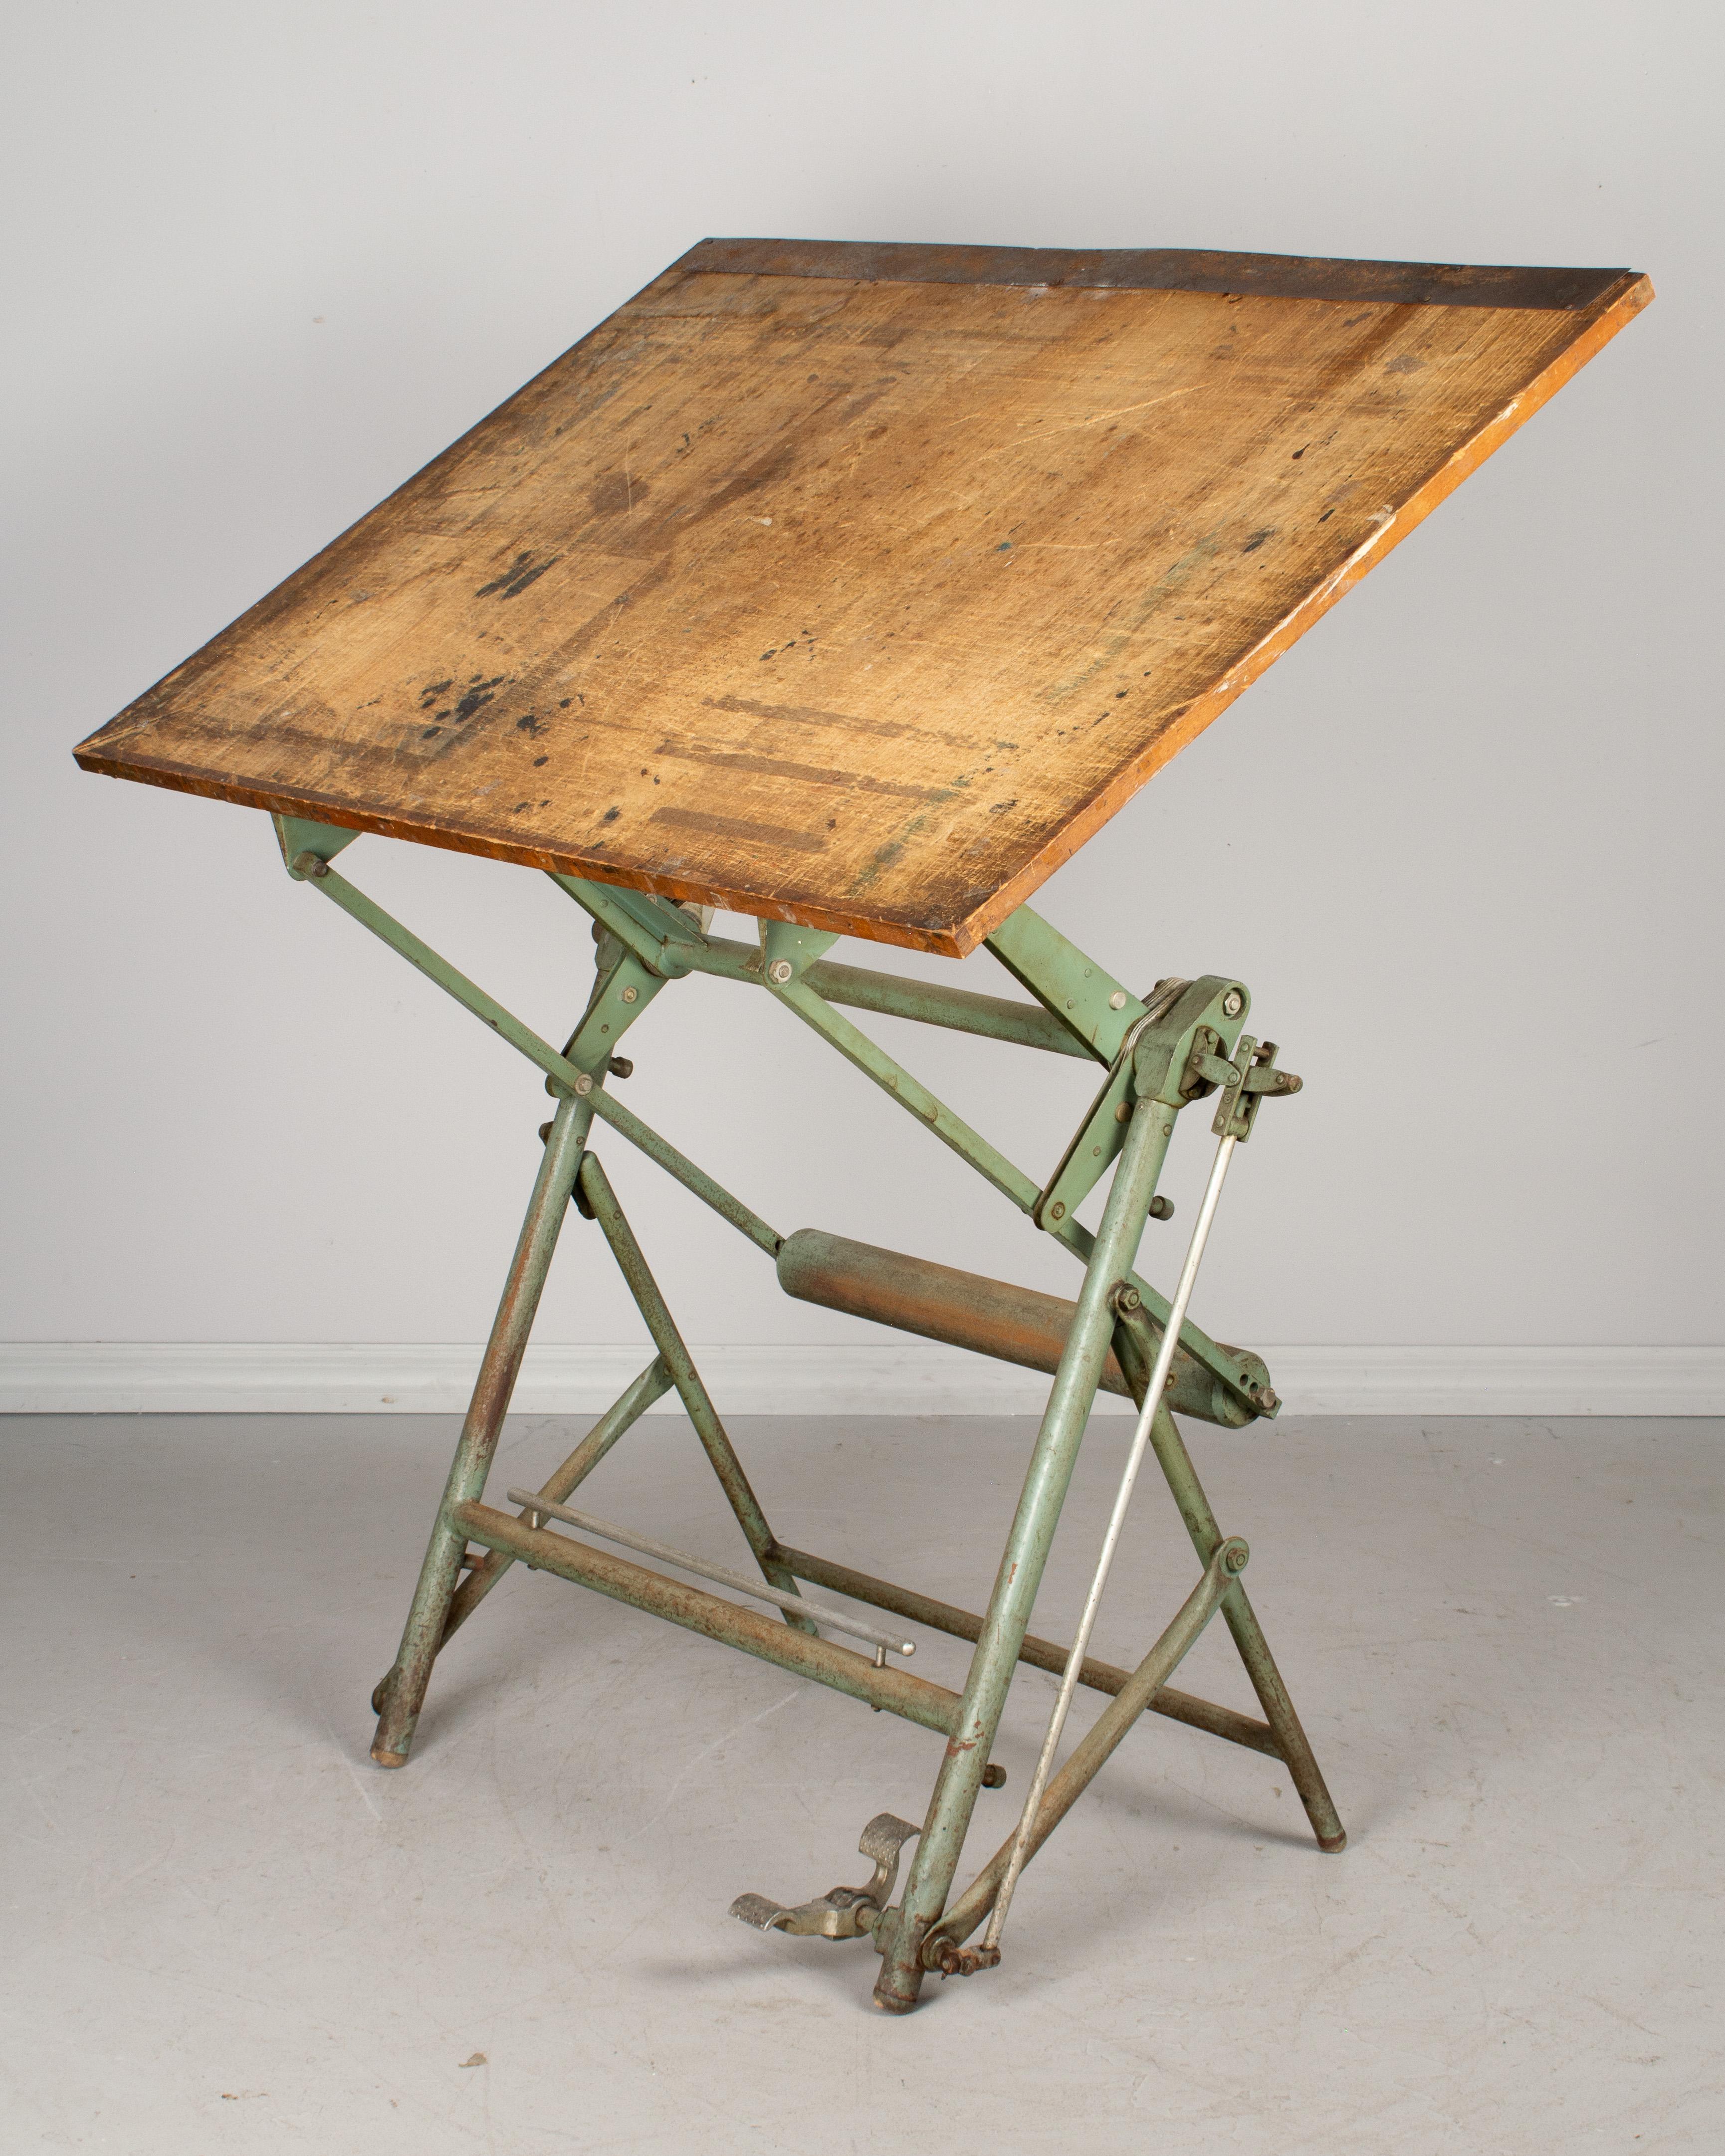 A French Industrial style mechanical architect's drafting table with original green lacquered metal base and large solid wood top. The platform is fully modular: using a pedal on the right it is possible to raise and lower the top and tilt it to any